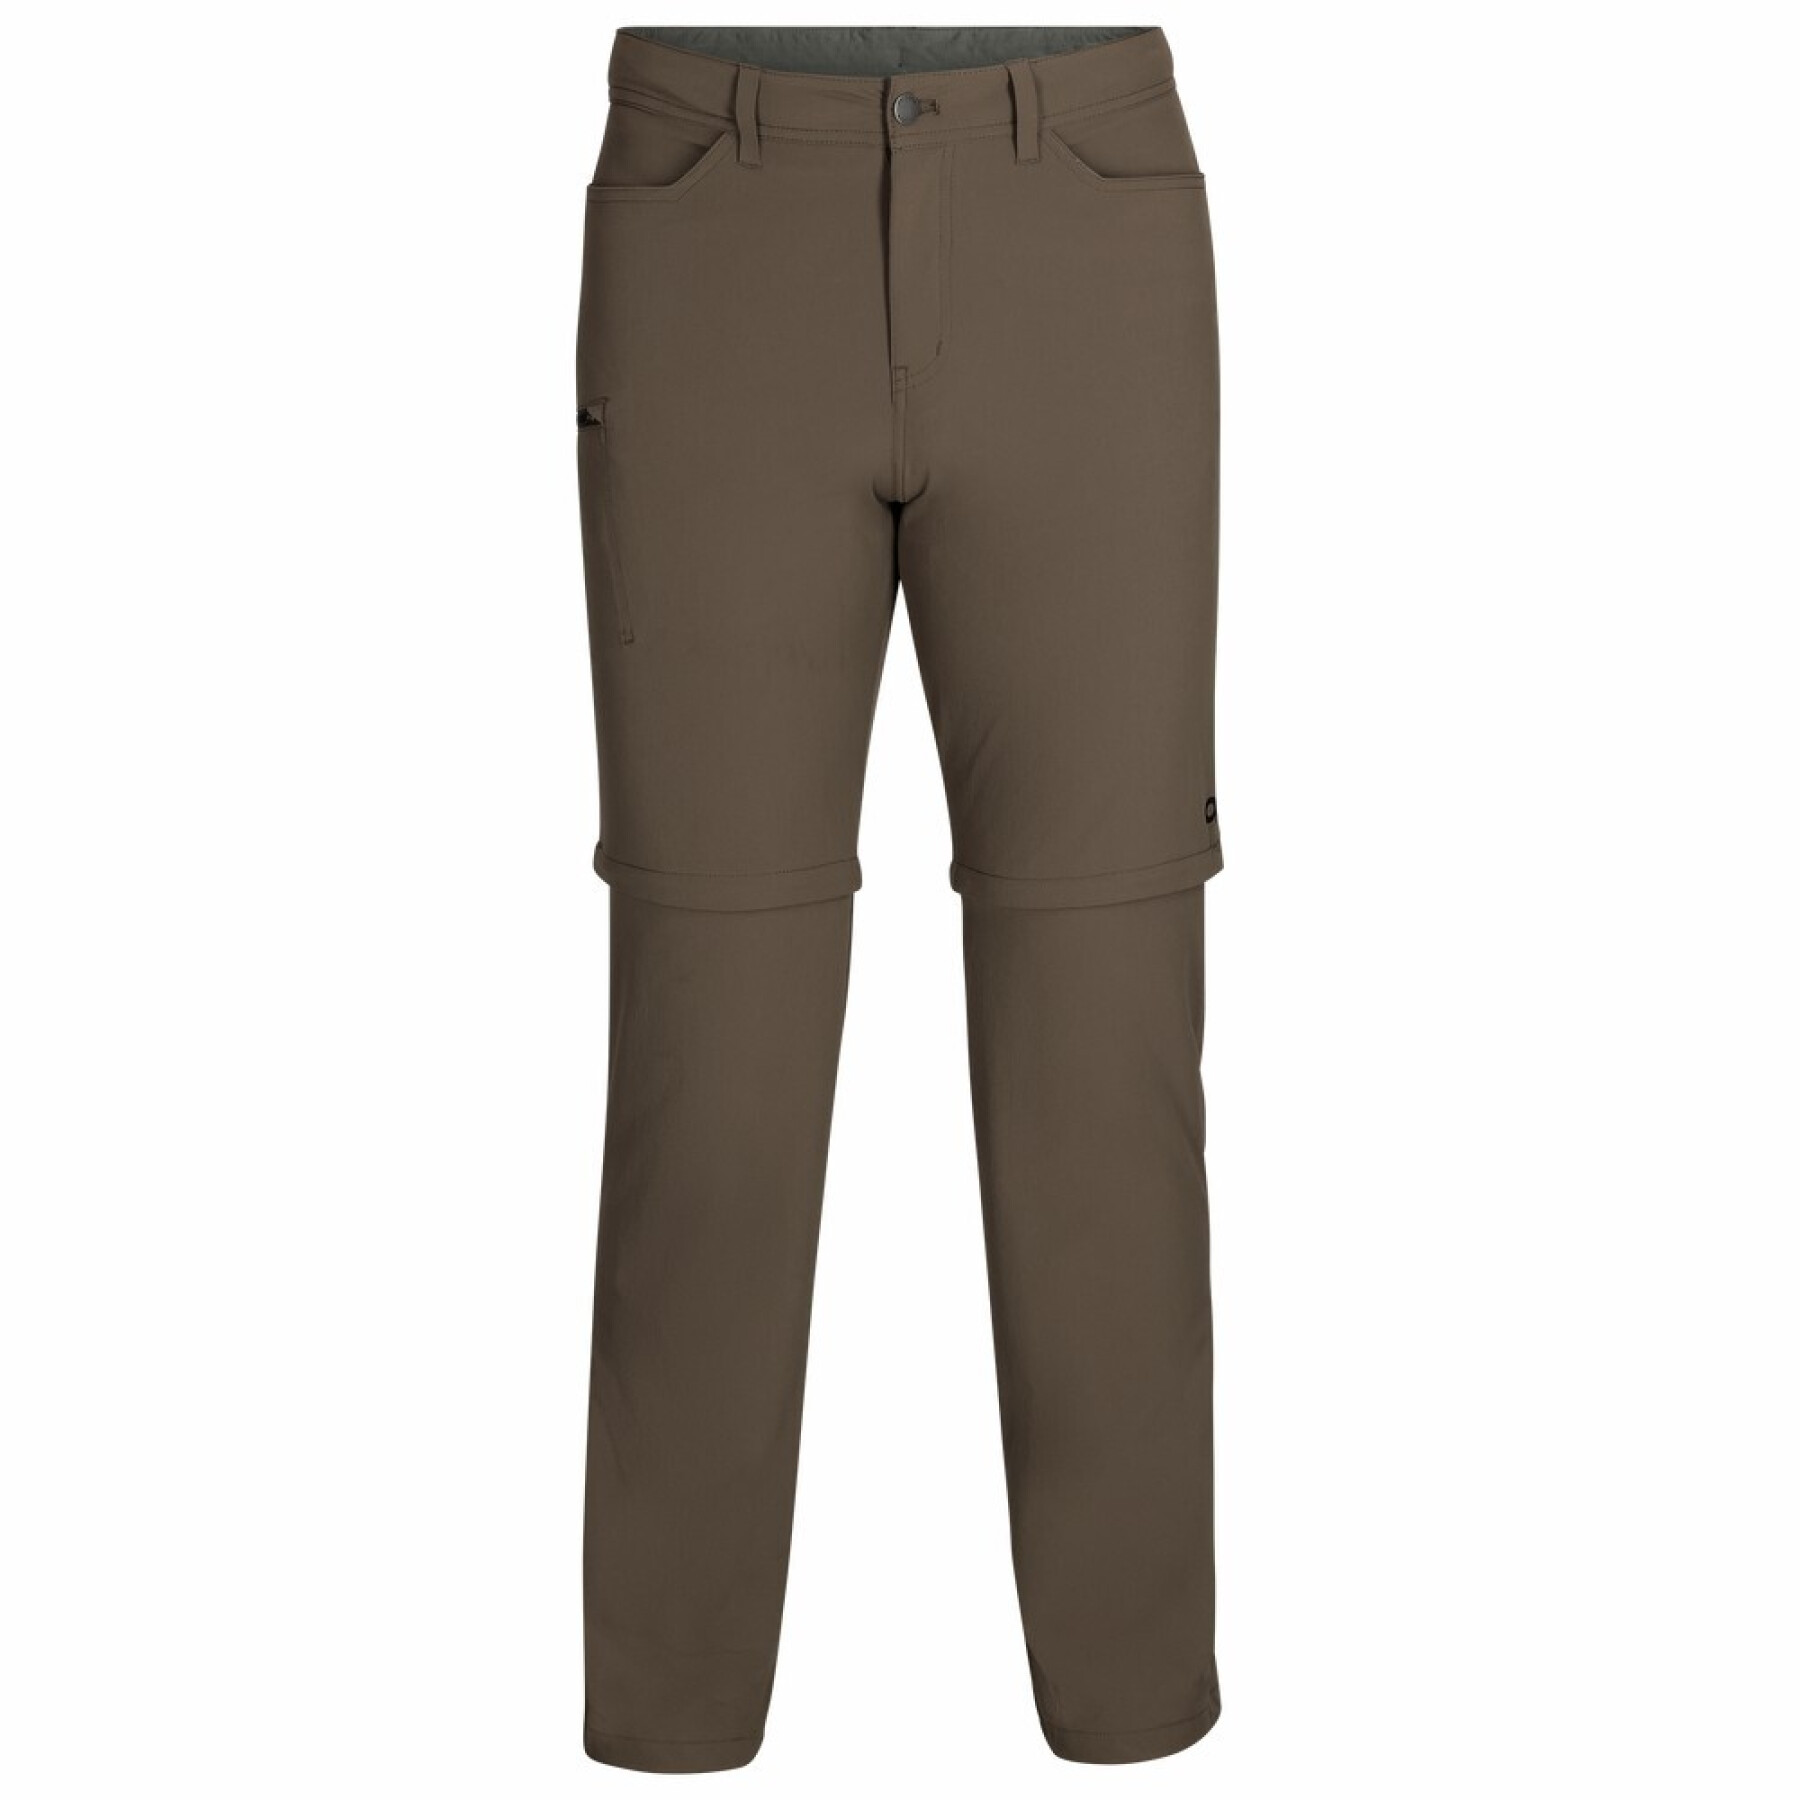 Convertible pants Outdoor Research Ferrosi 34"